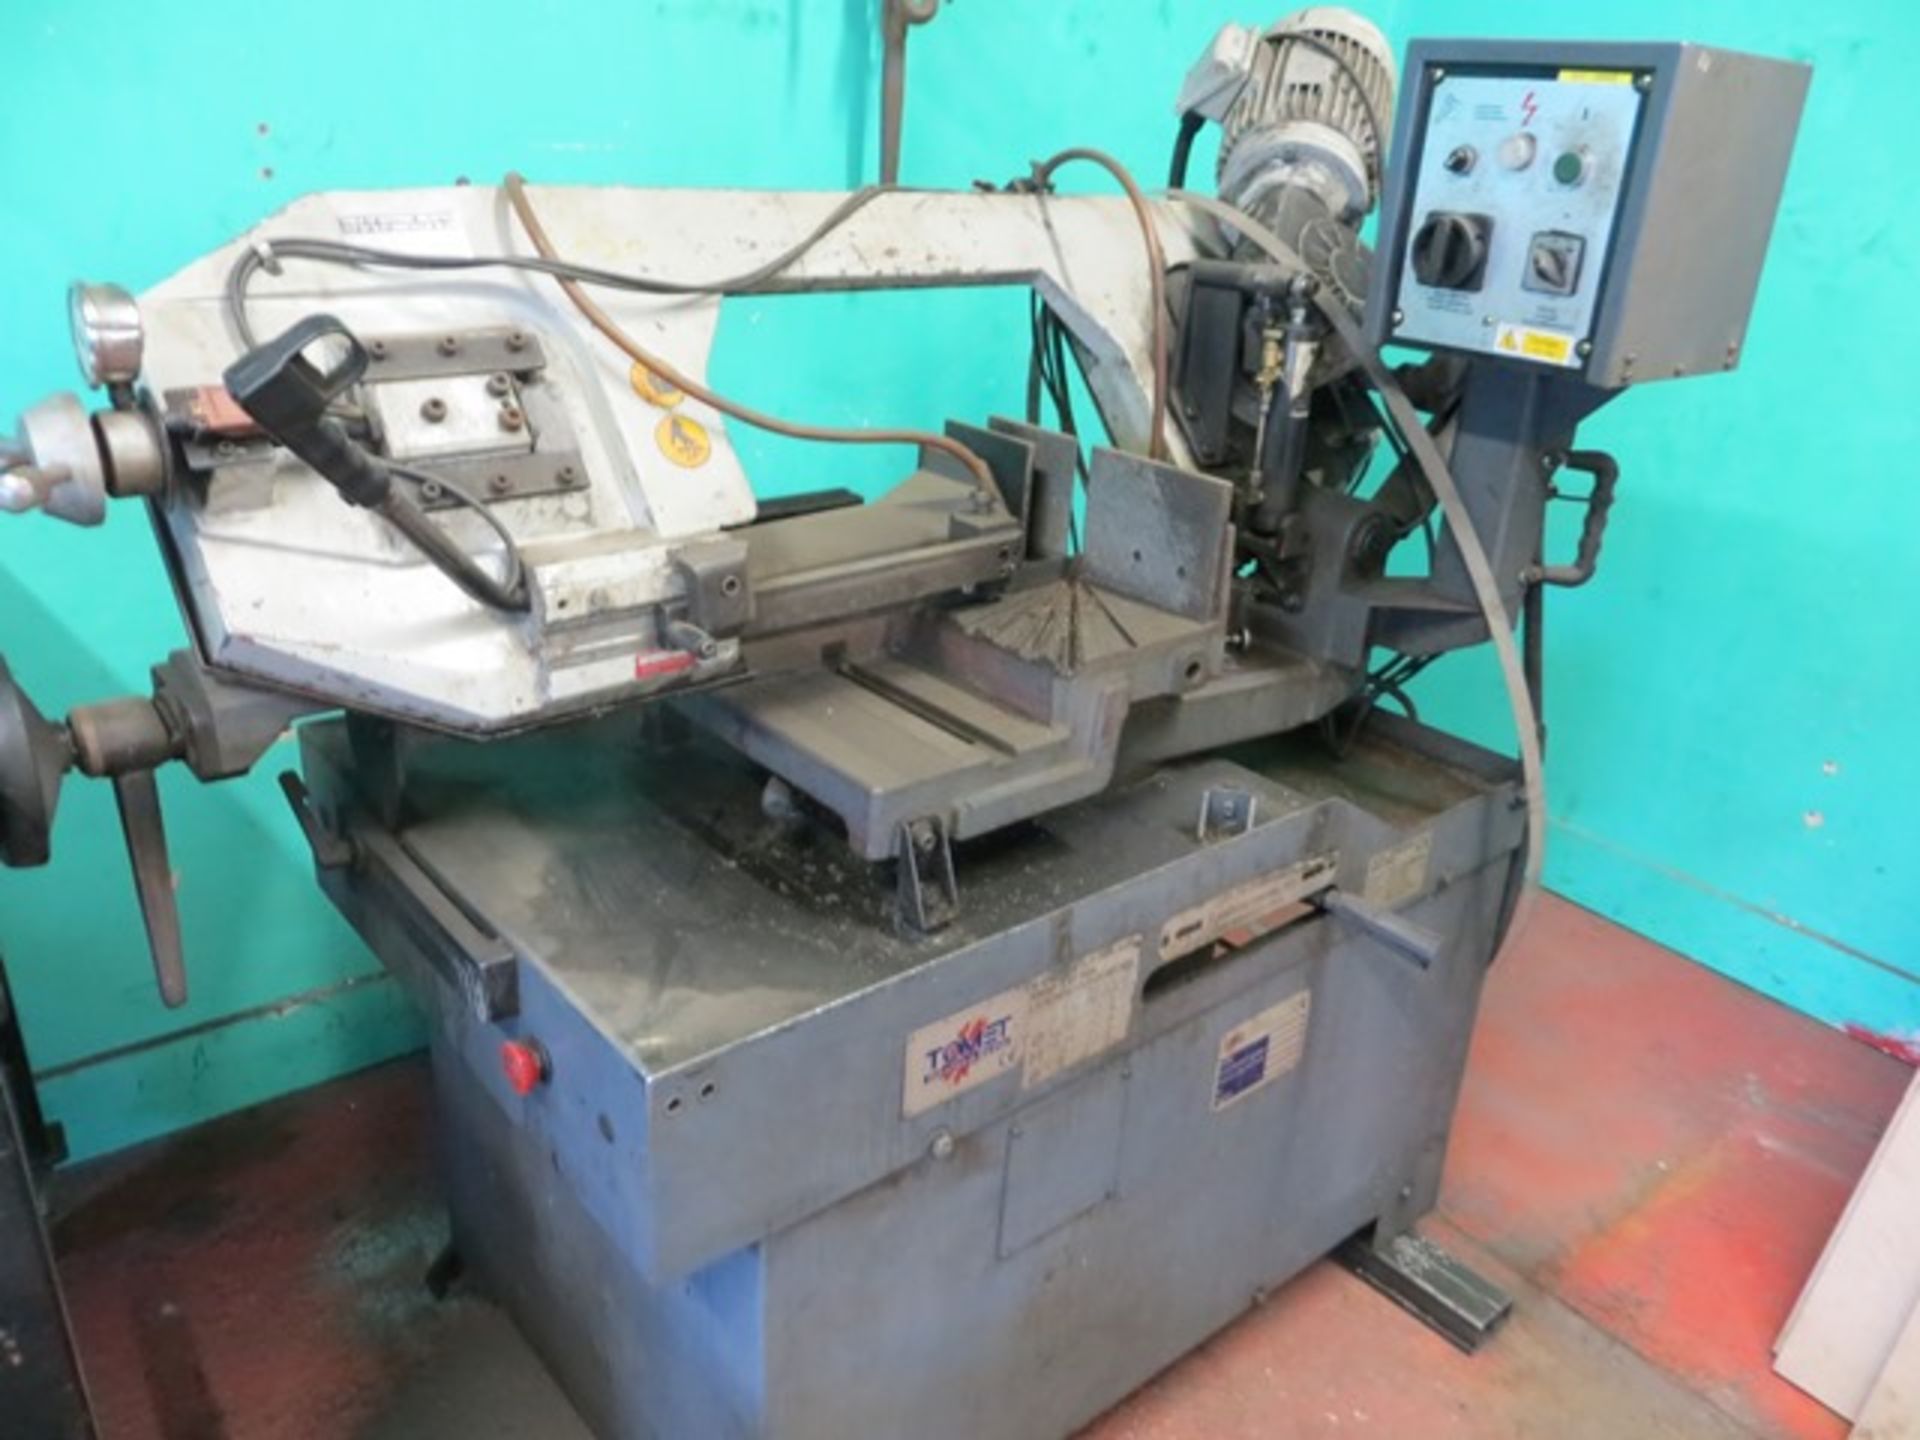 Tomet Three Phase Semi Automatic Double Mitre Bandsaw model 350 SXD Hydro (2008) s/n 08042433 c/w - Image 4 of 7